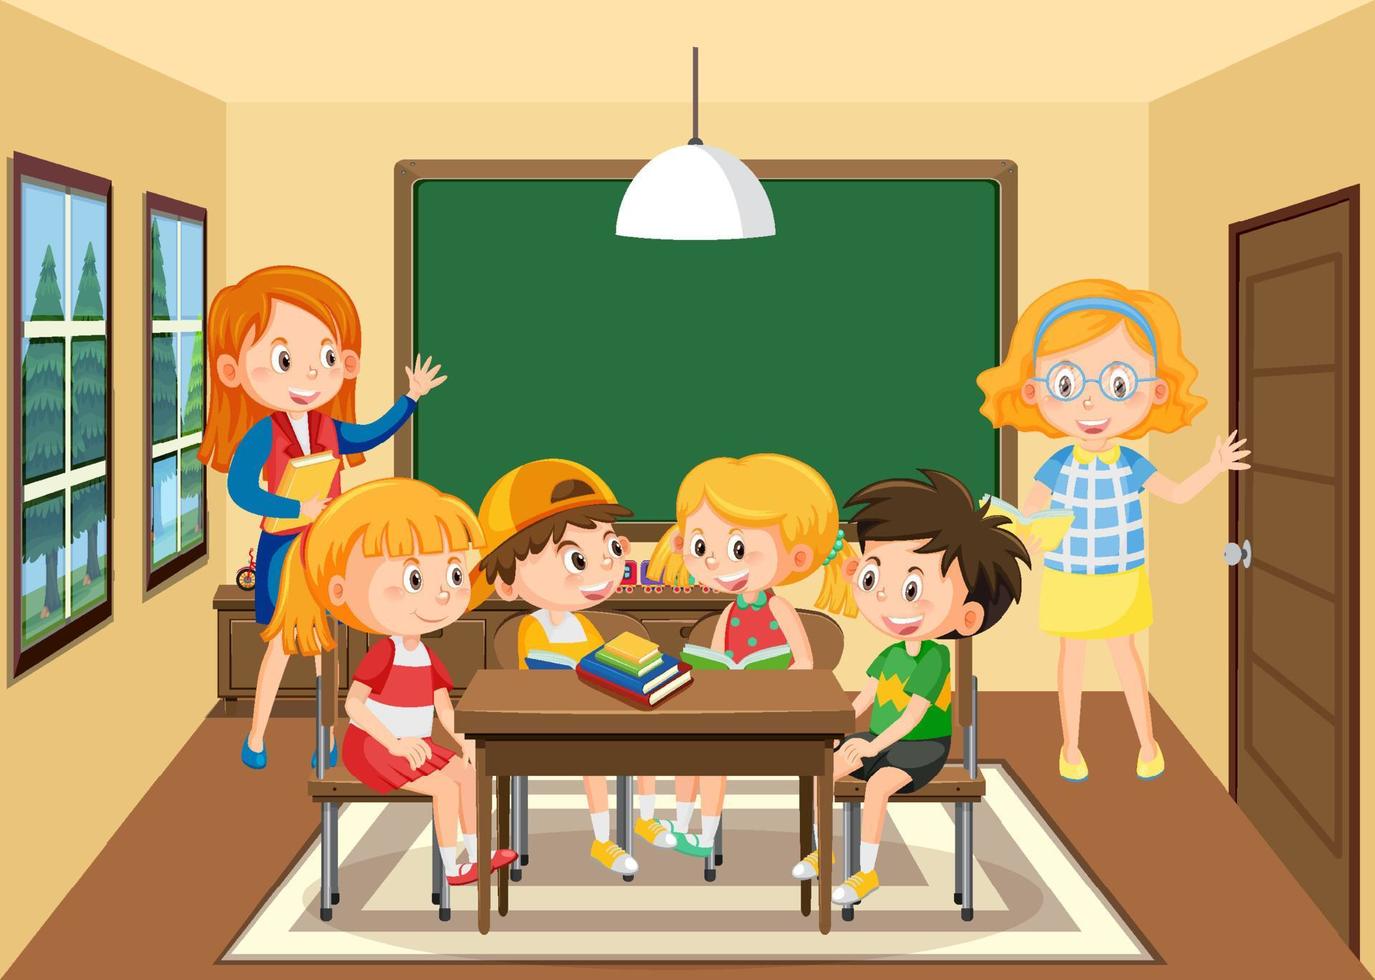 Teacher and students in the classroom vector